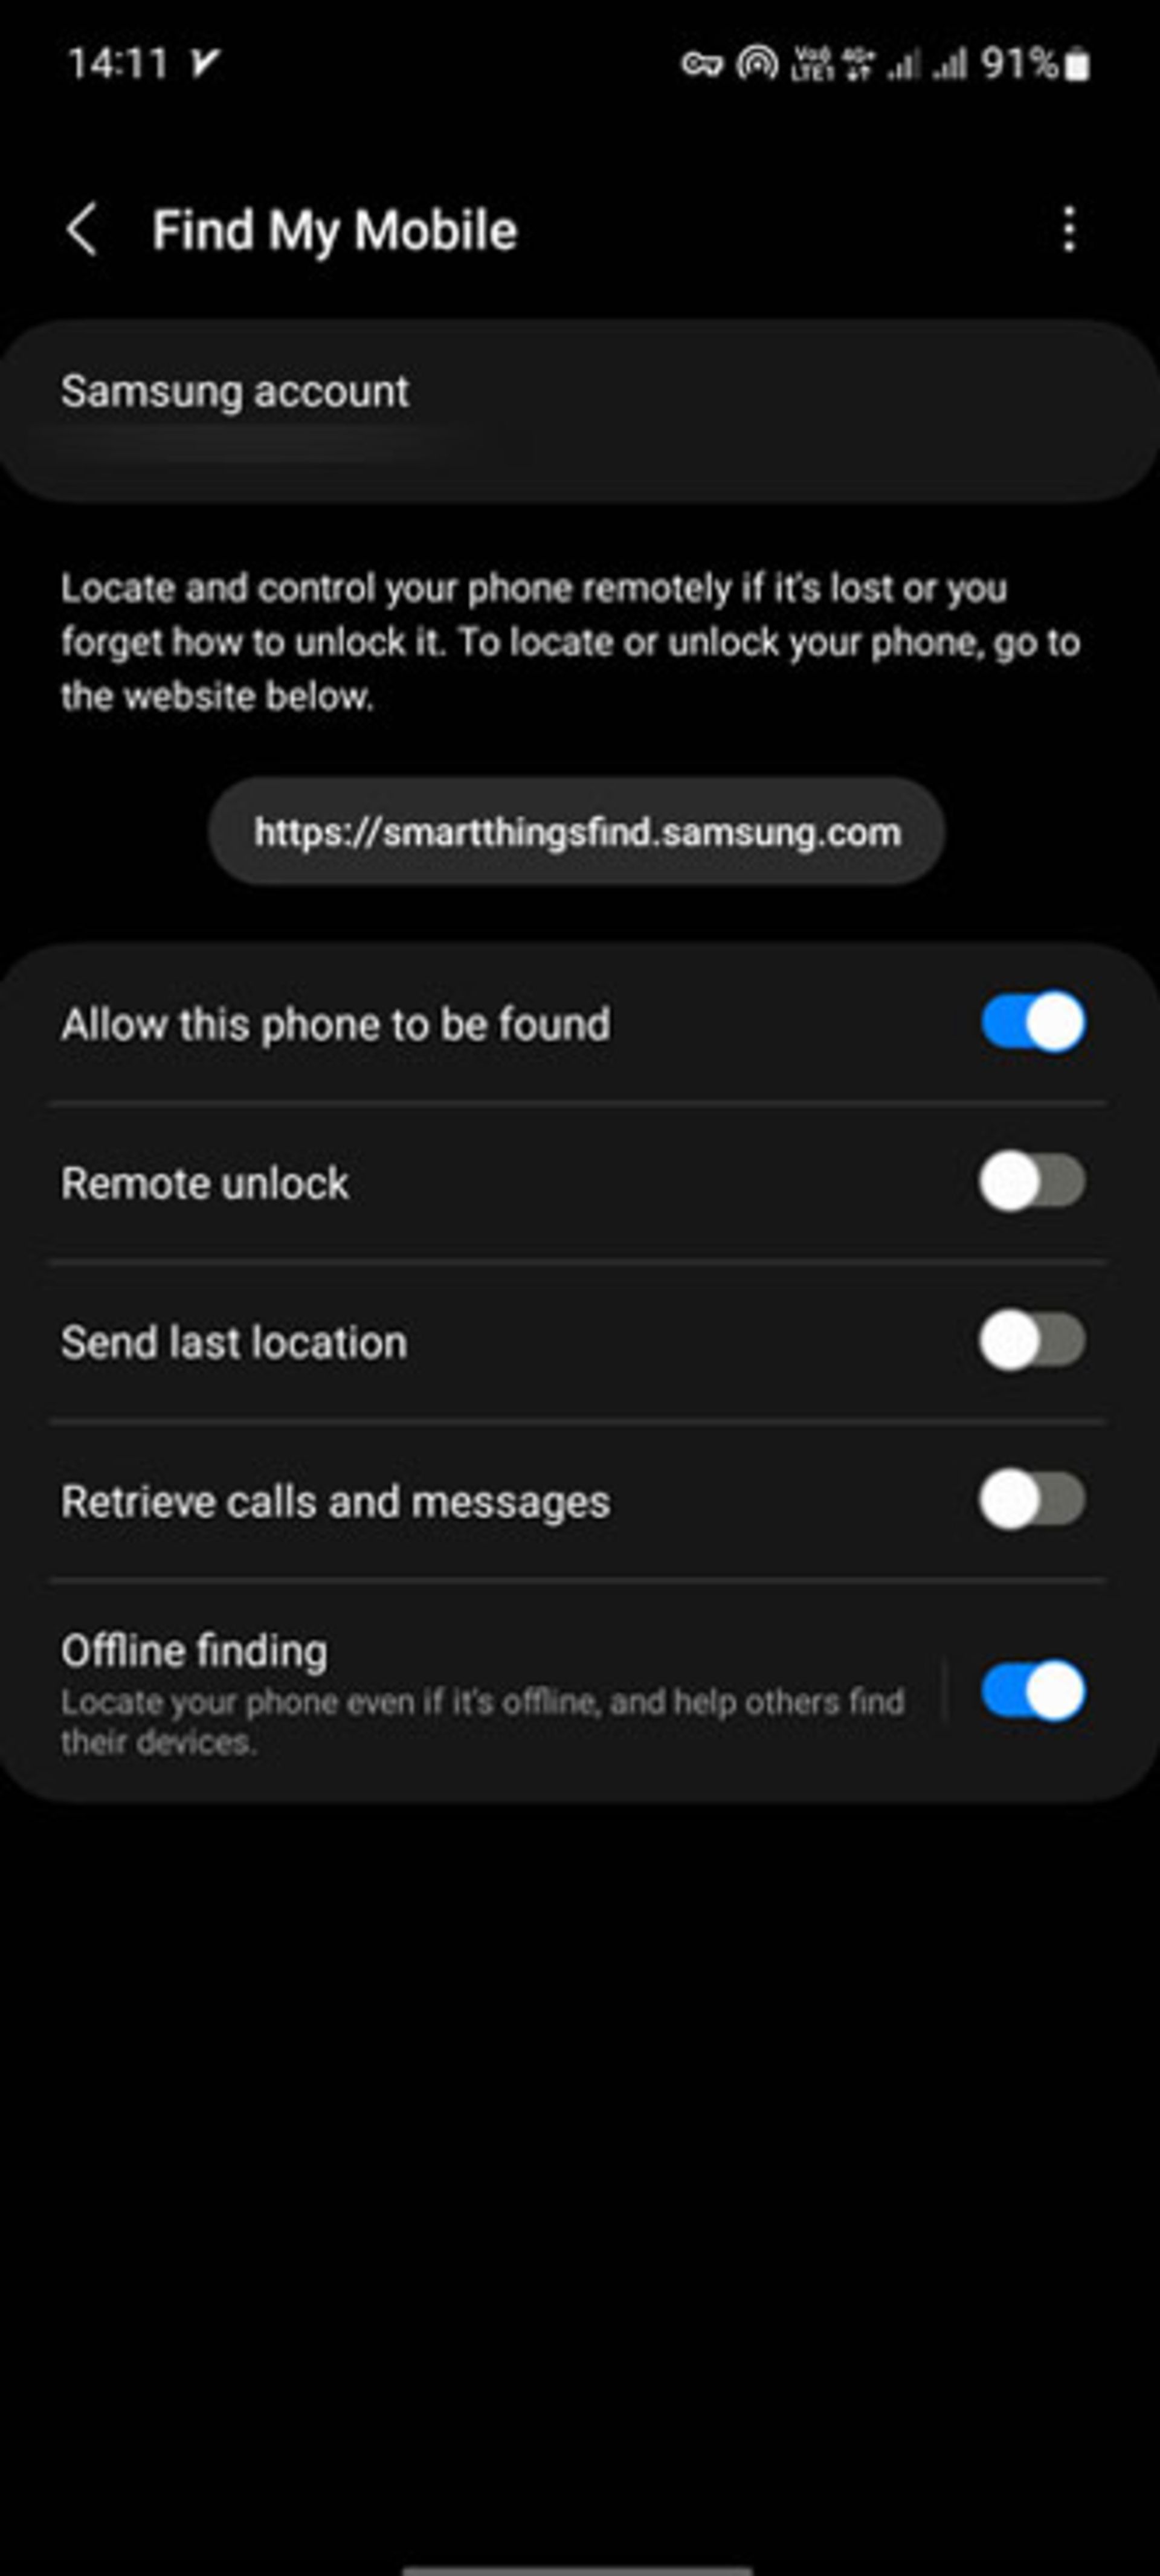 Find My Mobile settings